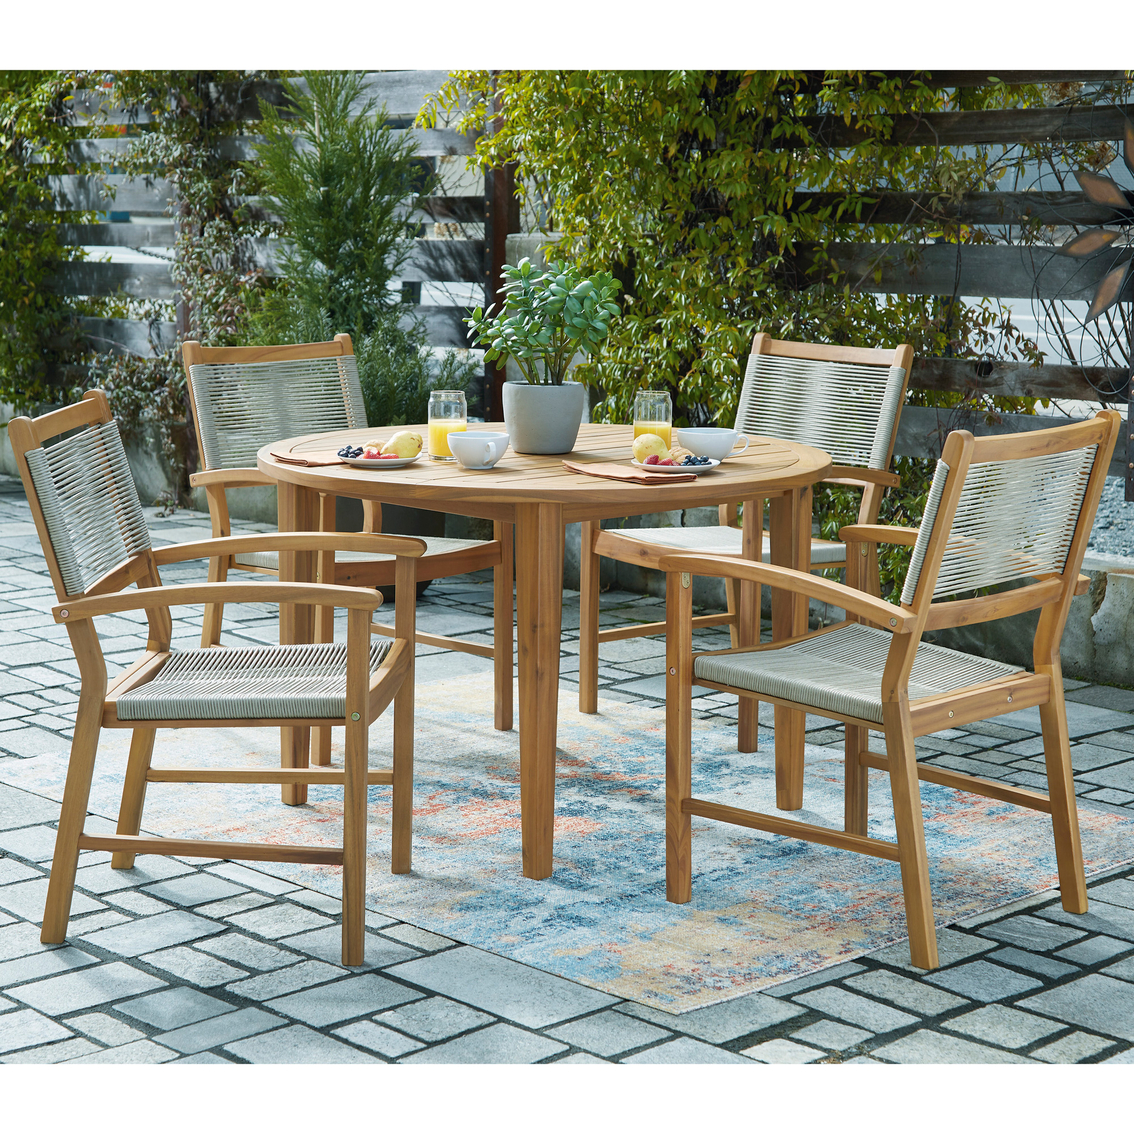 Signature Design by Ashley Janiyah Outdoor Round Dining Table - Image 5 of 6